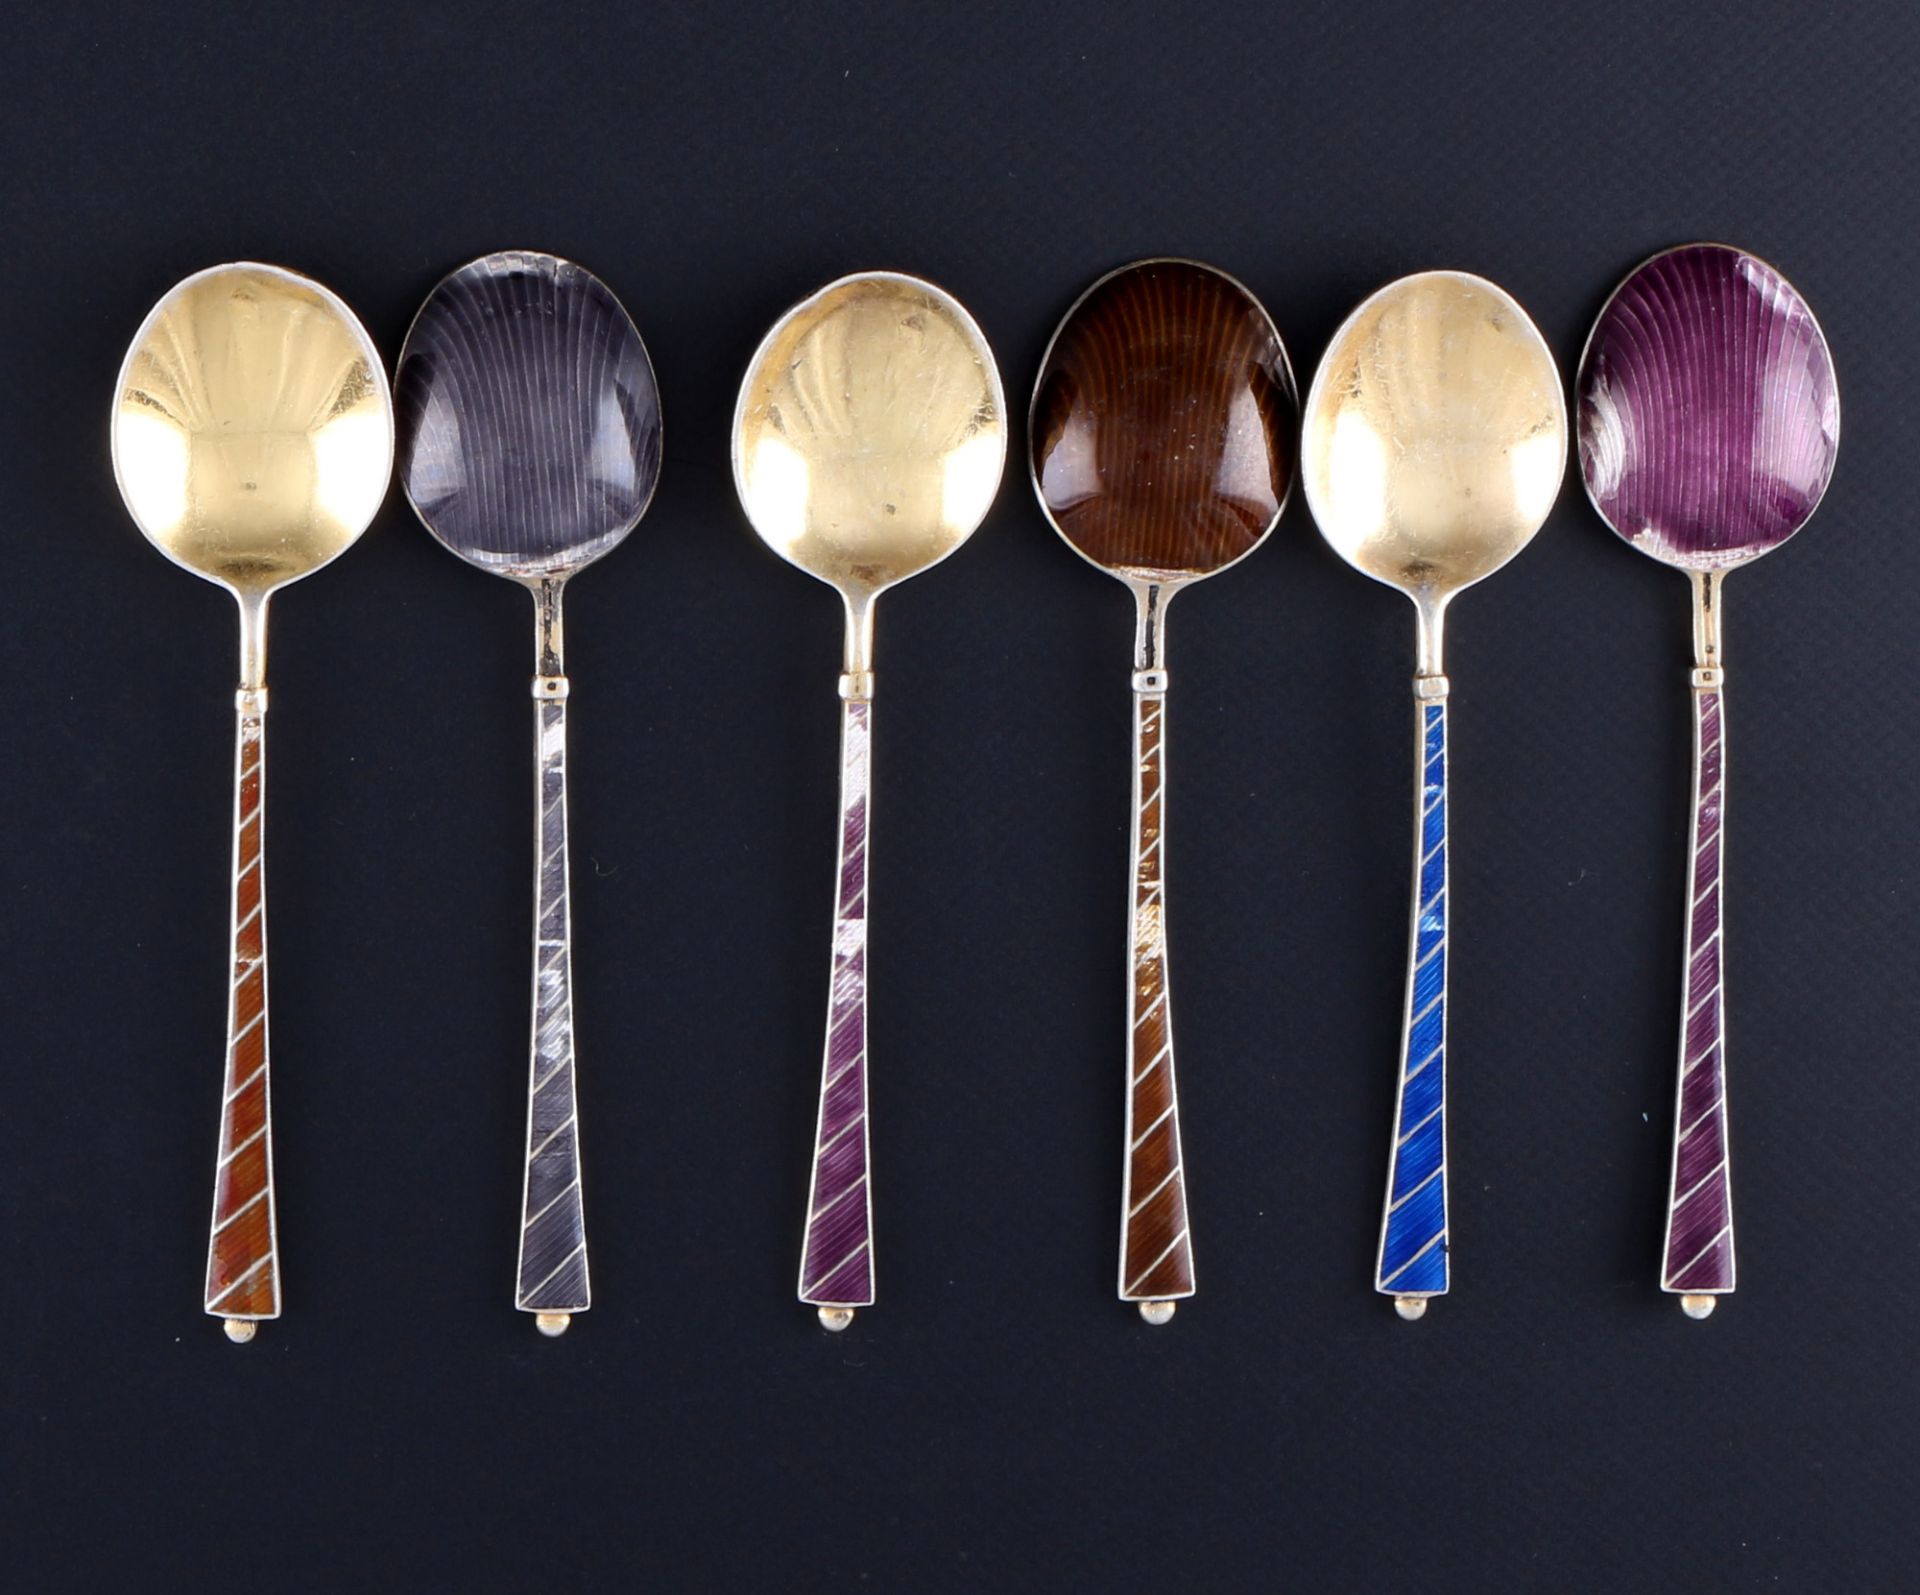 925 silver 15 enameled cutlery pieces, sterling silver 15 pieces enamel silver cutlery, - Image 3 of 7